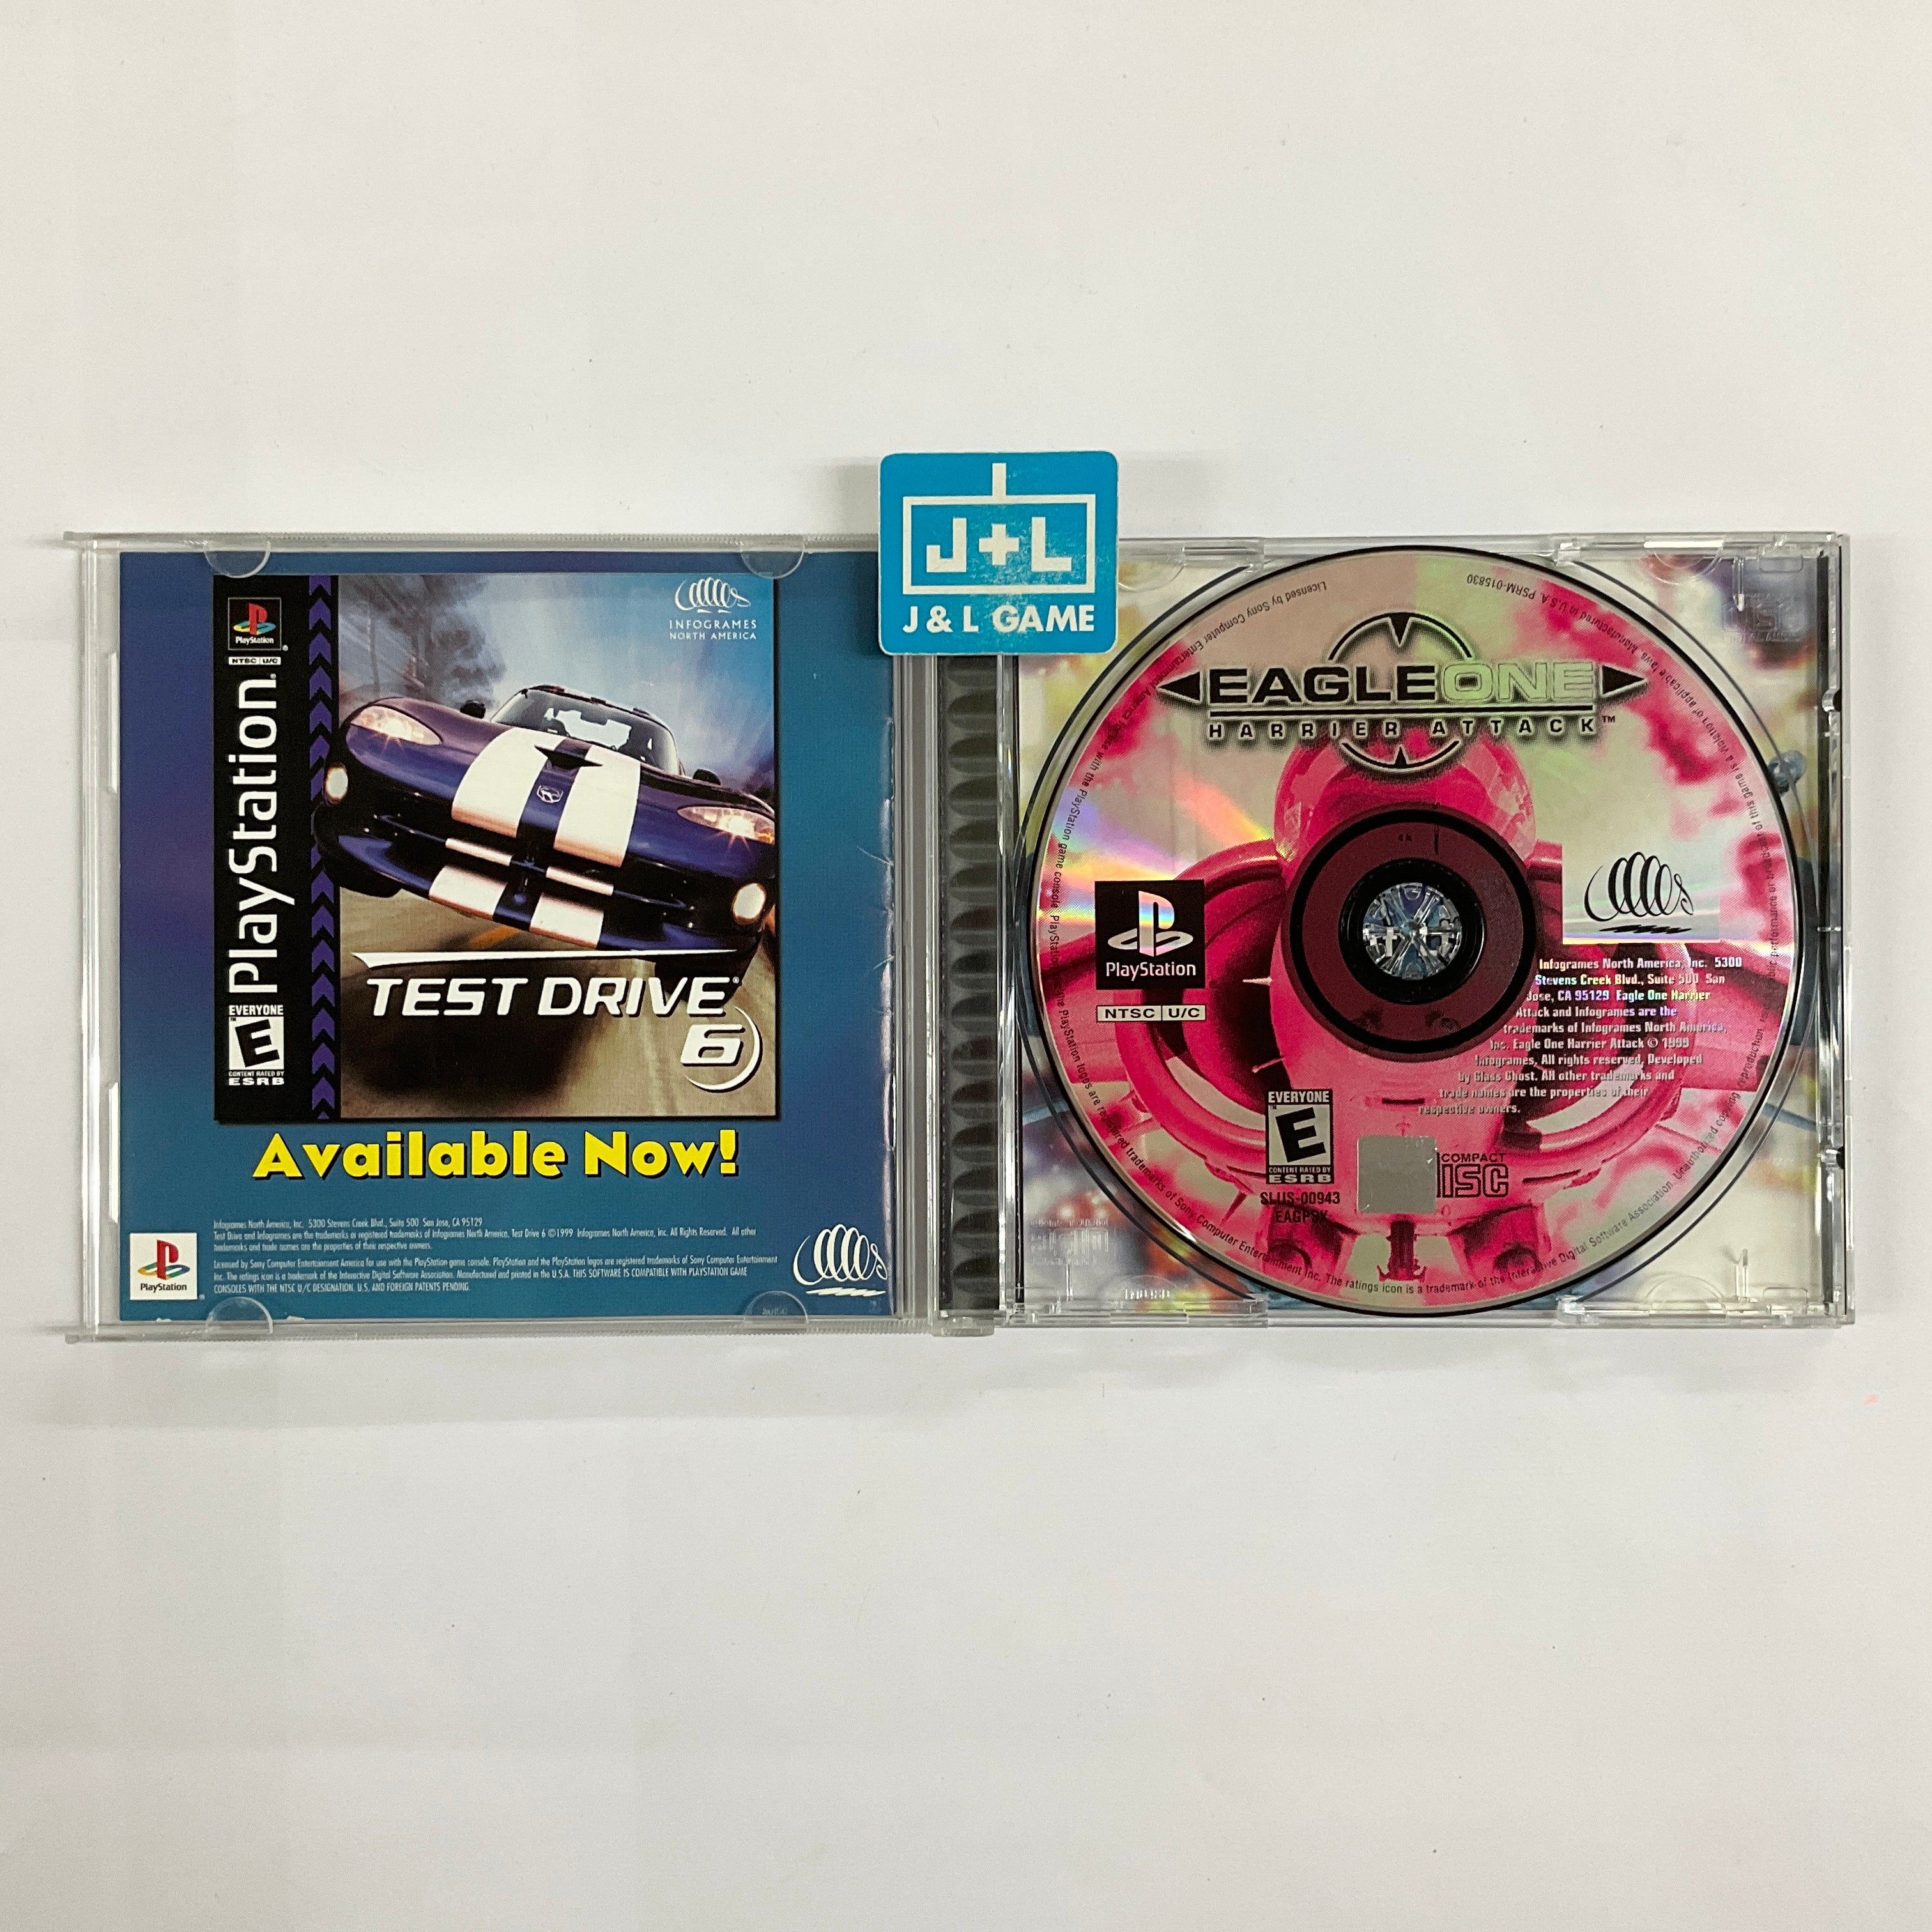 Eagle One Harrier Attack - (PS1) Playstation 1 [Pre-Owned] Video Games Infogames   